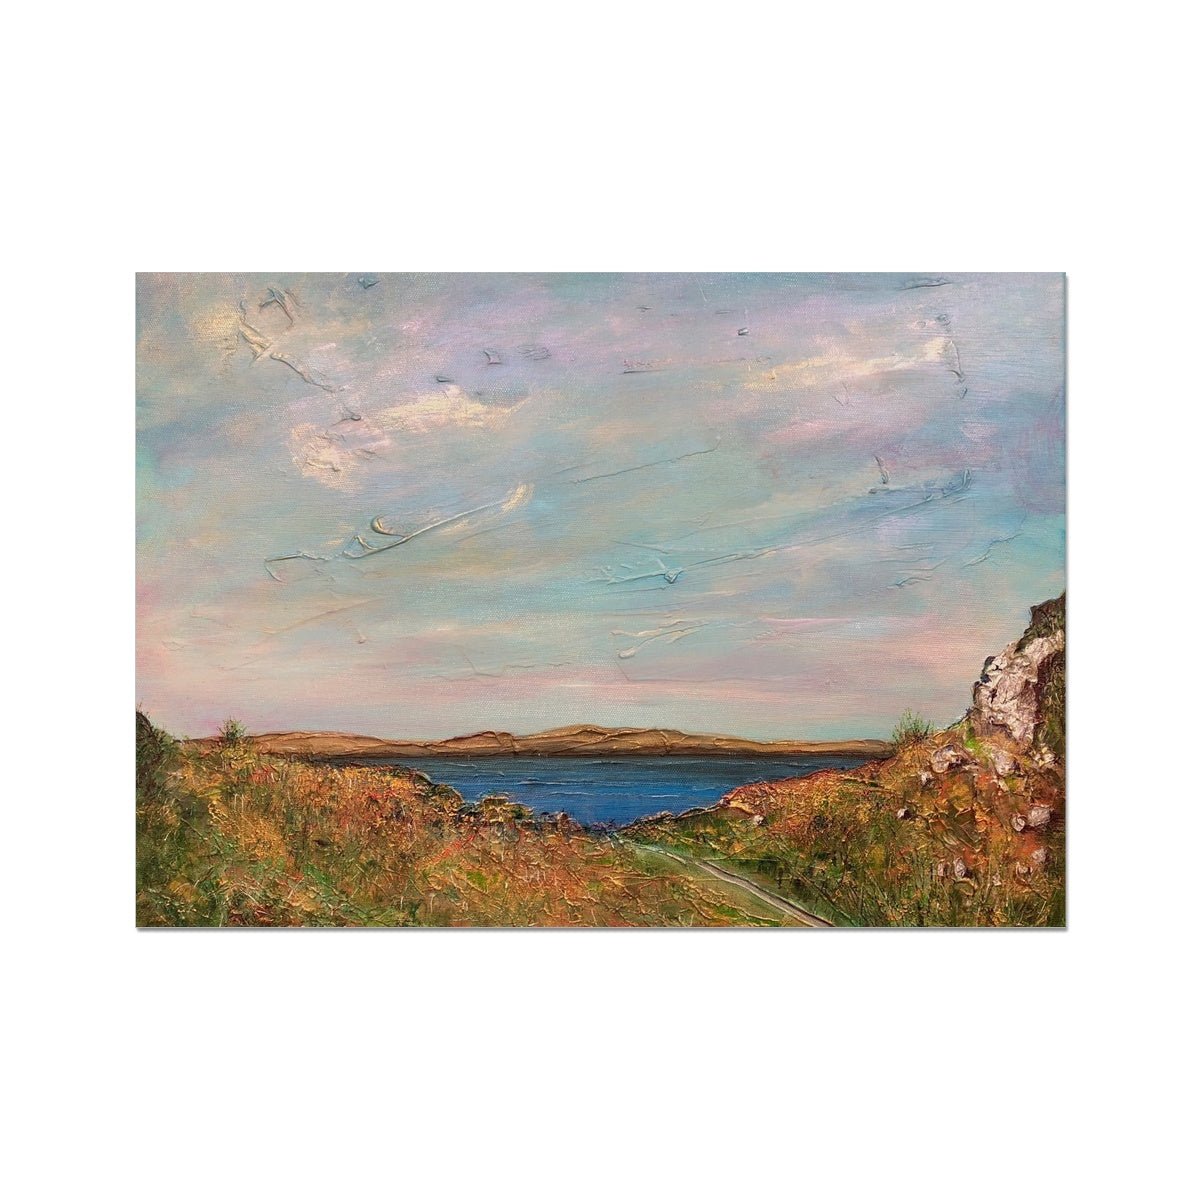 Jura From Crinan Painting | Fine Art Prints From Scotland-Unframed Prints-Hebridean Islands Art Gallery-A2 Landscape-Paintings, Prints, Homeware, Art Gifts From Scotland By Scottish Artist Kevin Hunter